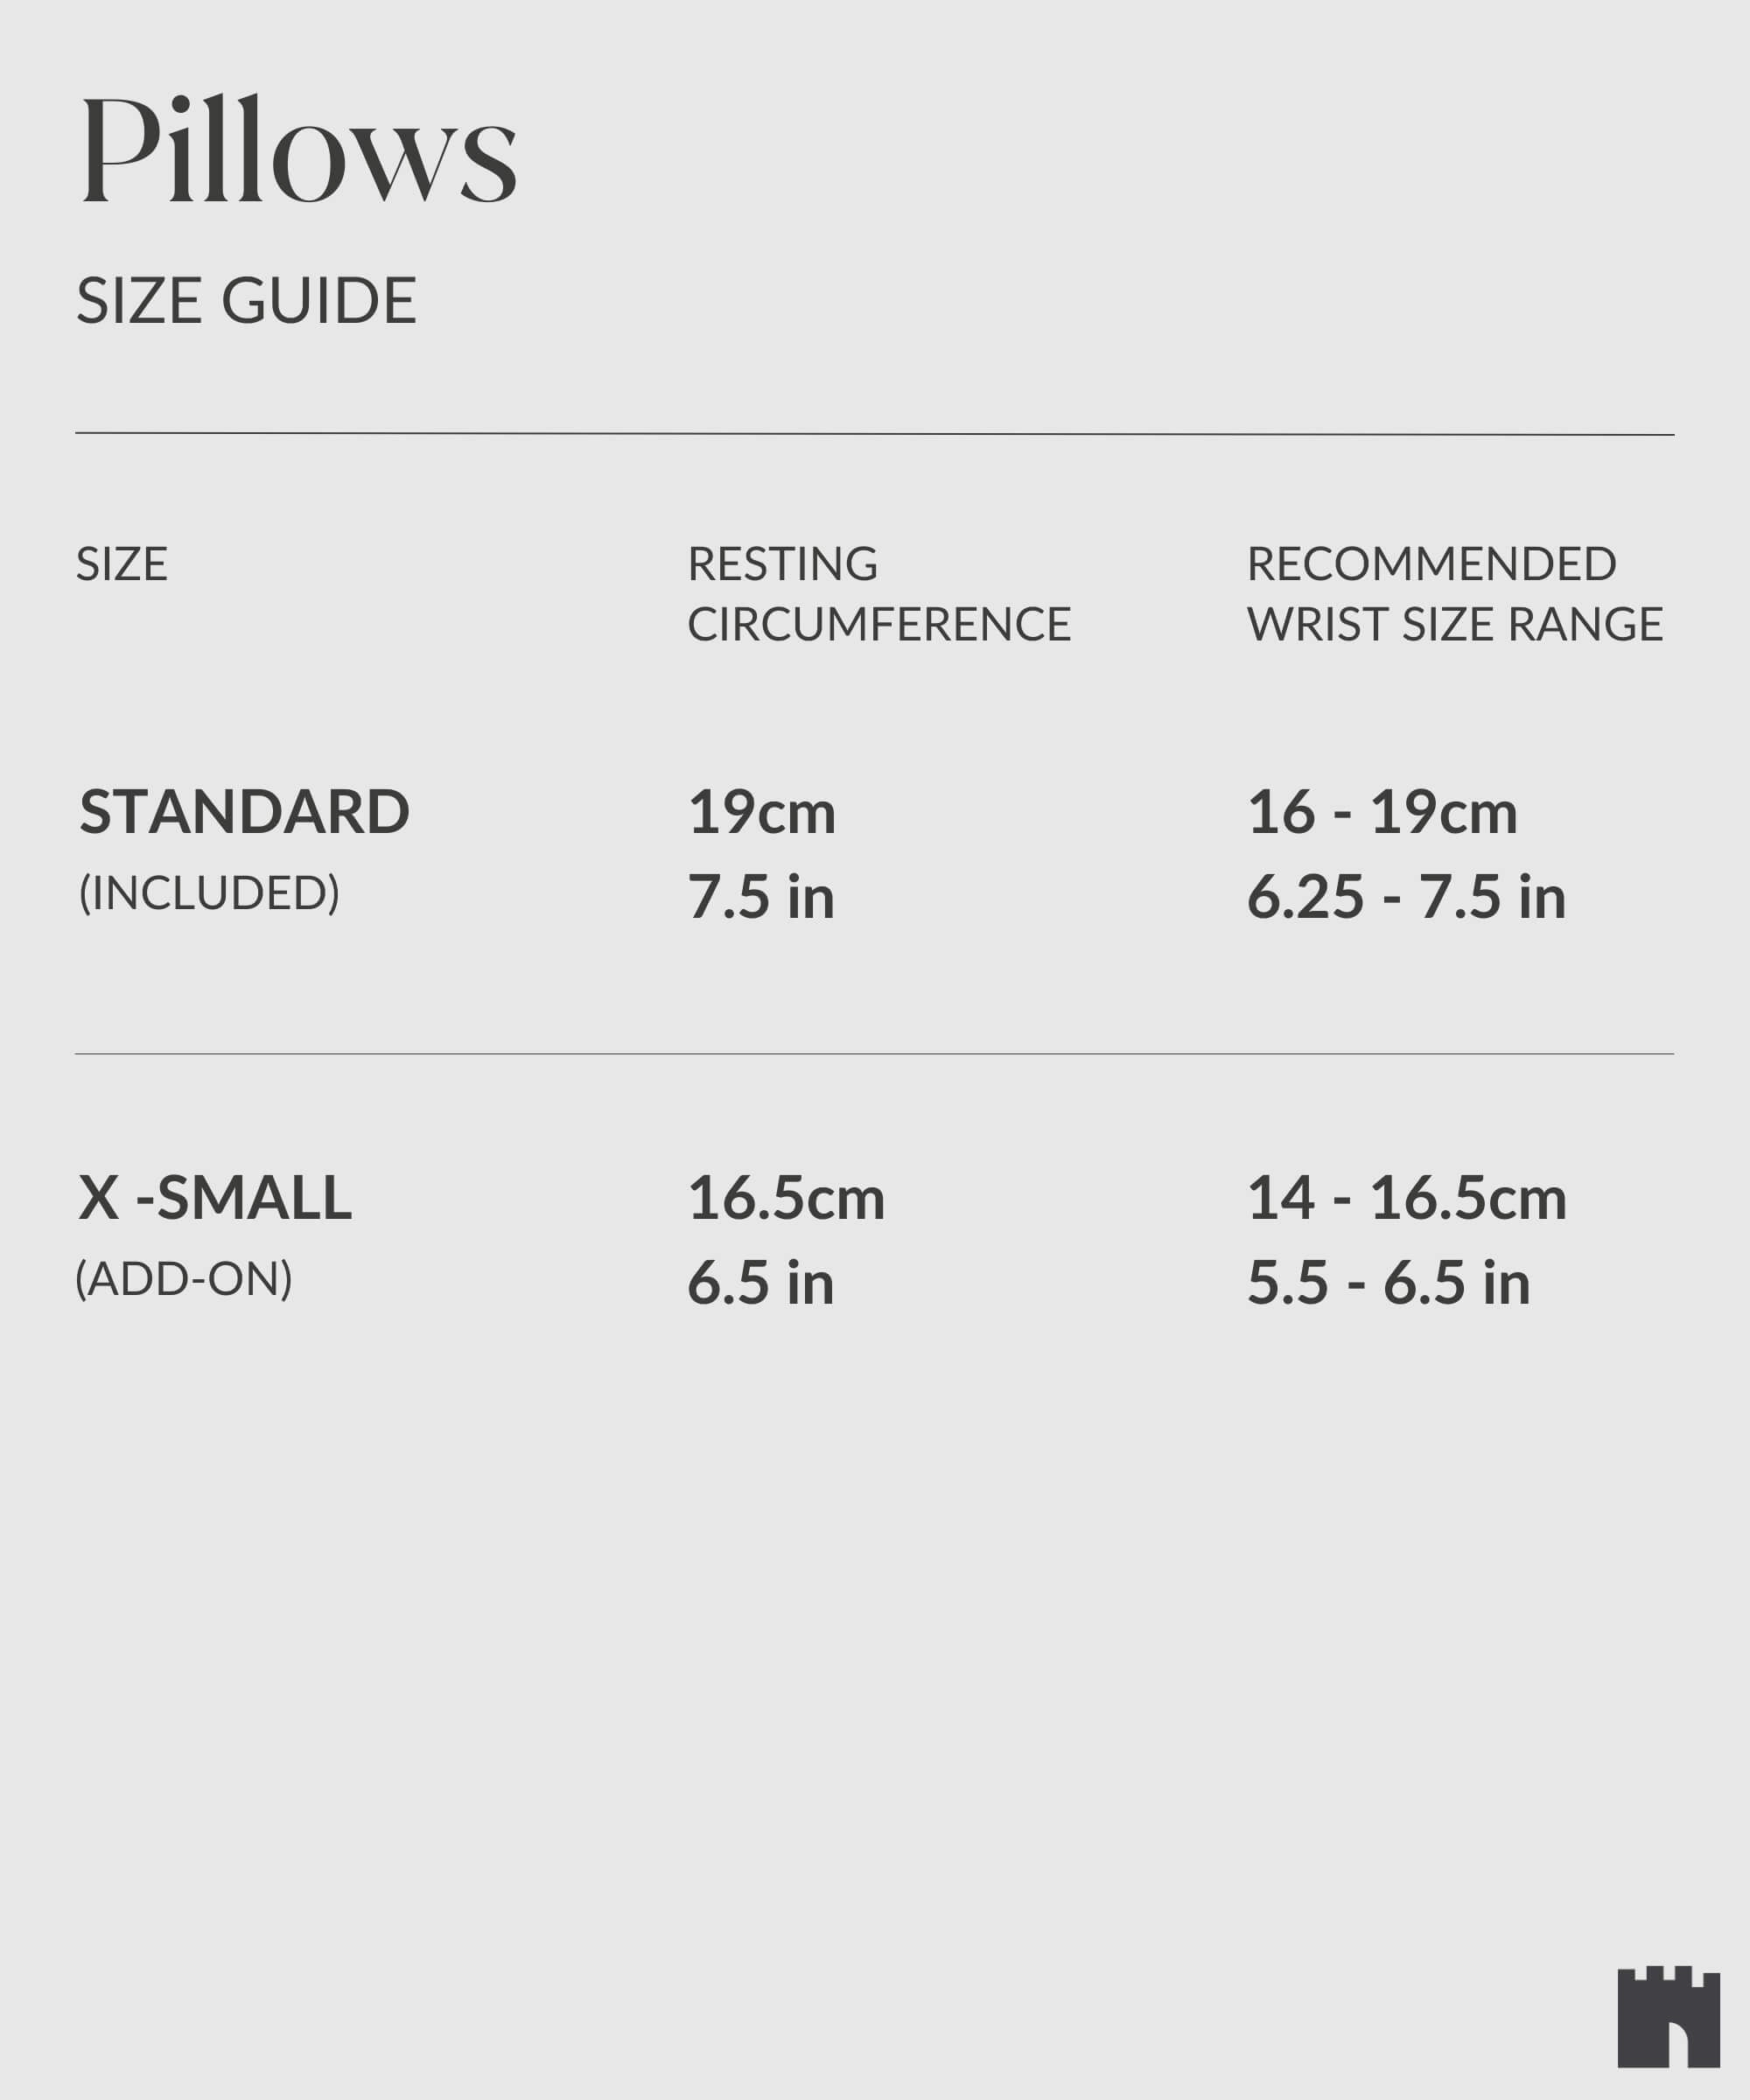 Text image titled "Pillows Size Guide" showing sizes: Standard with 19cm resting circumference for wrist sizes 16-19cm, and X-Small (add-on) with 16.5cm resting circumference for wrist sizes 14-16.5cm, offering cushioned support perfect for TAWBURY Fraser Replacement Watch Case Pillows - X-Small - Taupe/Cream or watch travel cases.